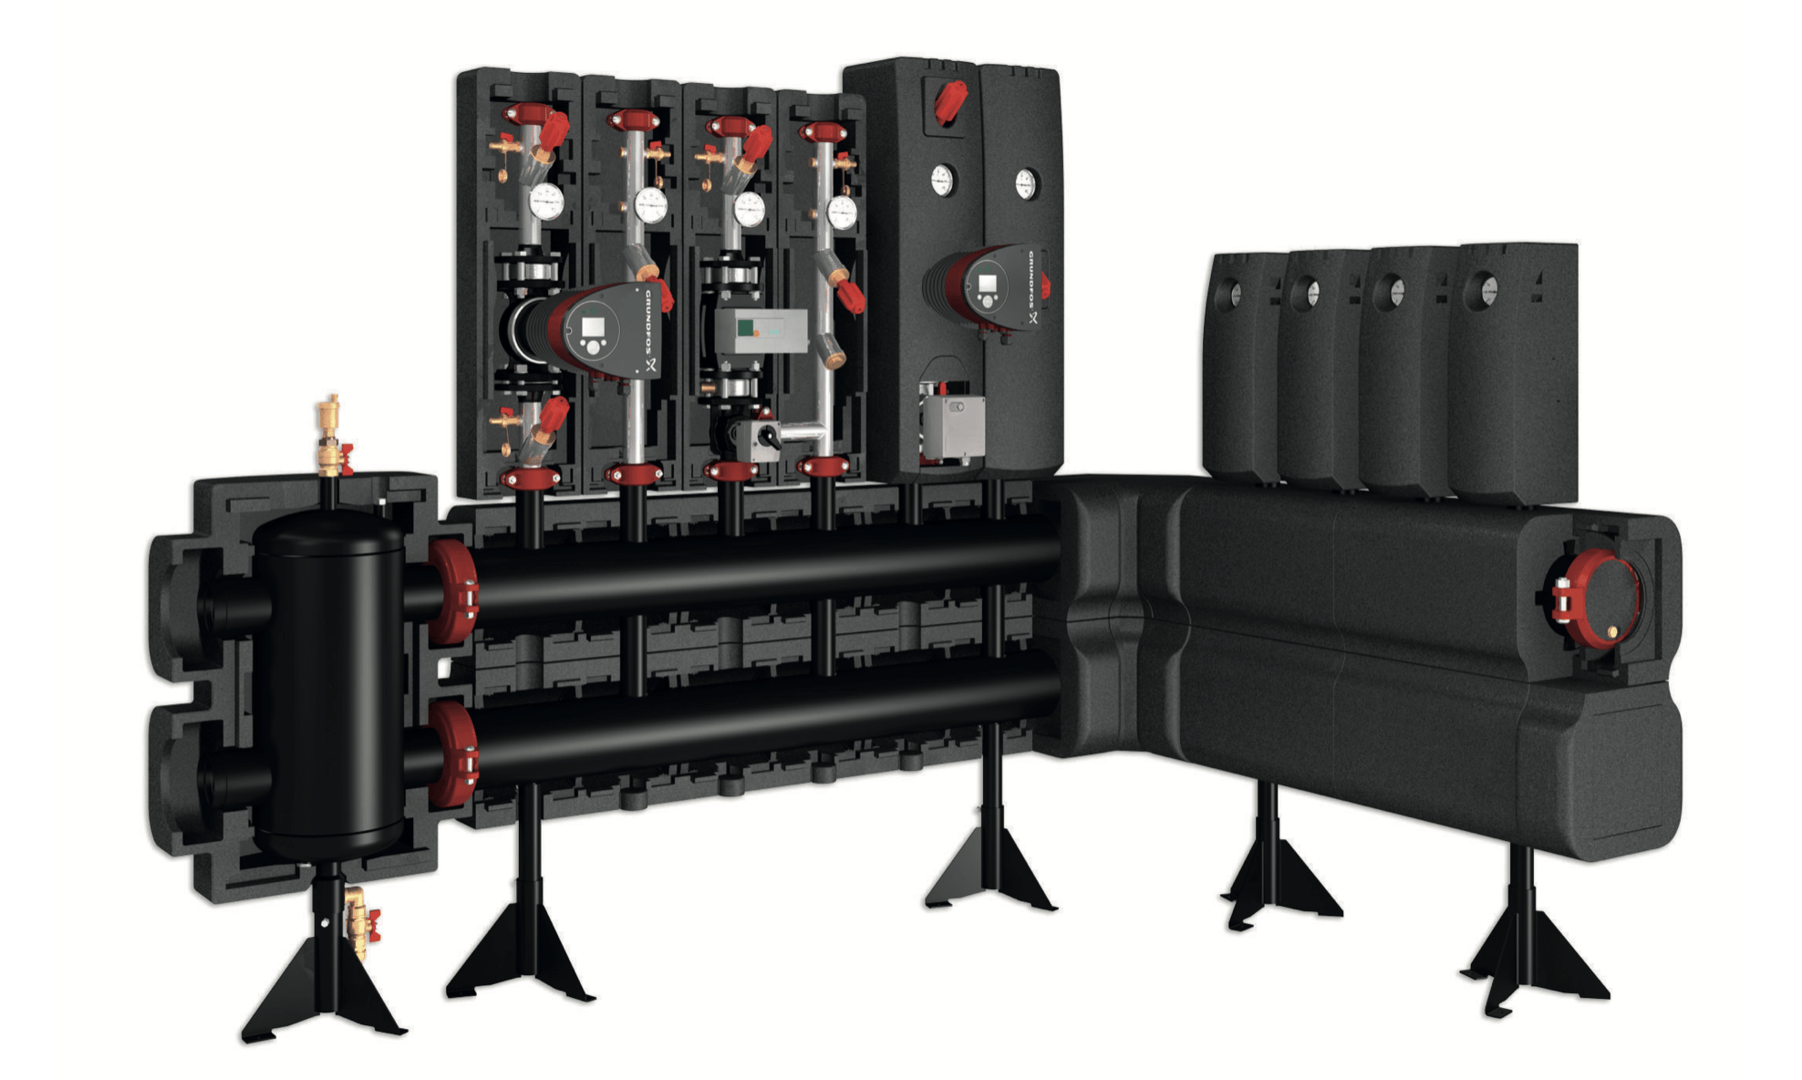  Flamco-Meibes mounting systems